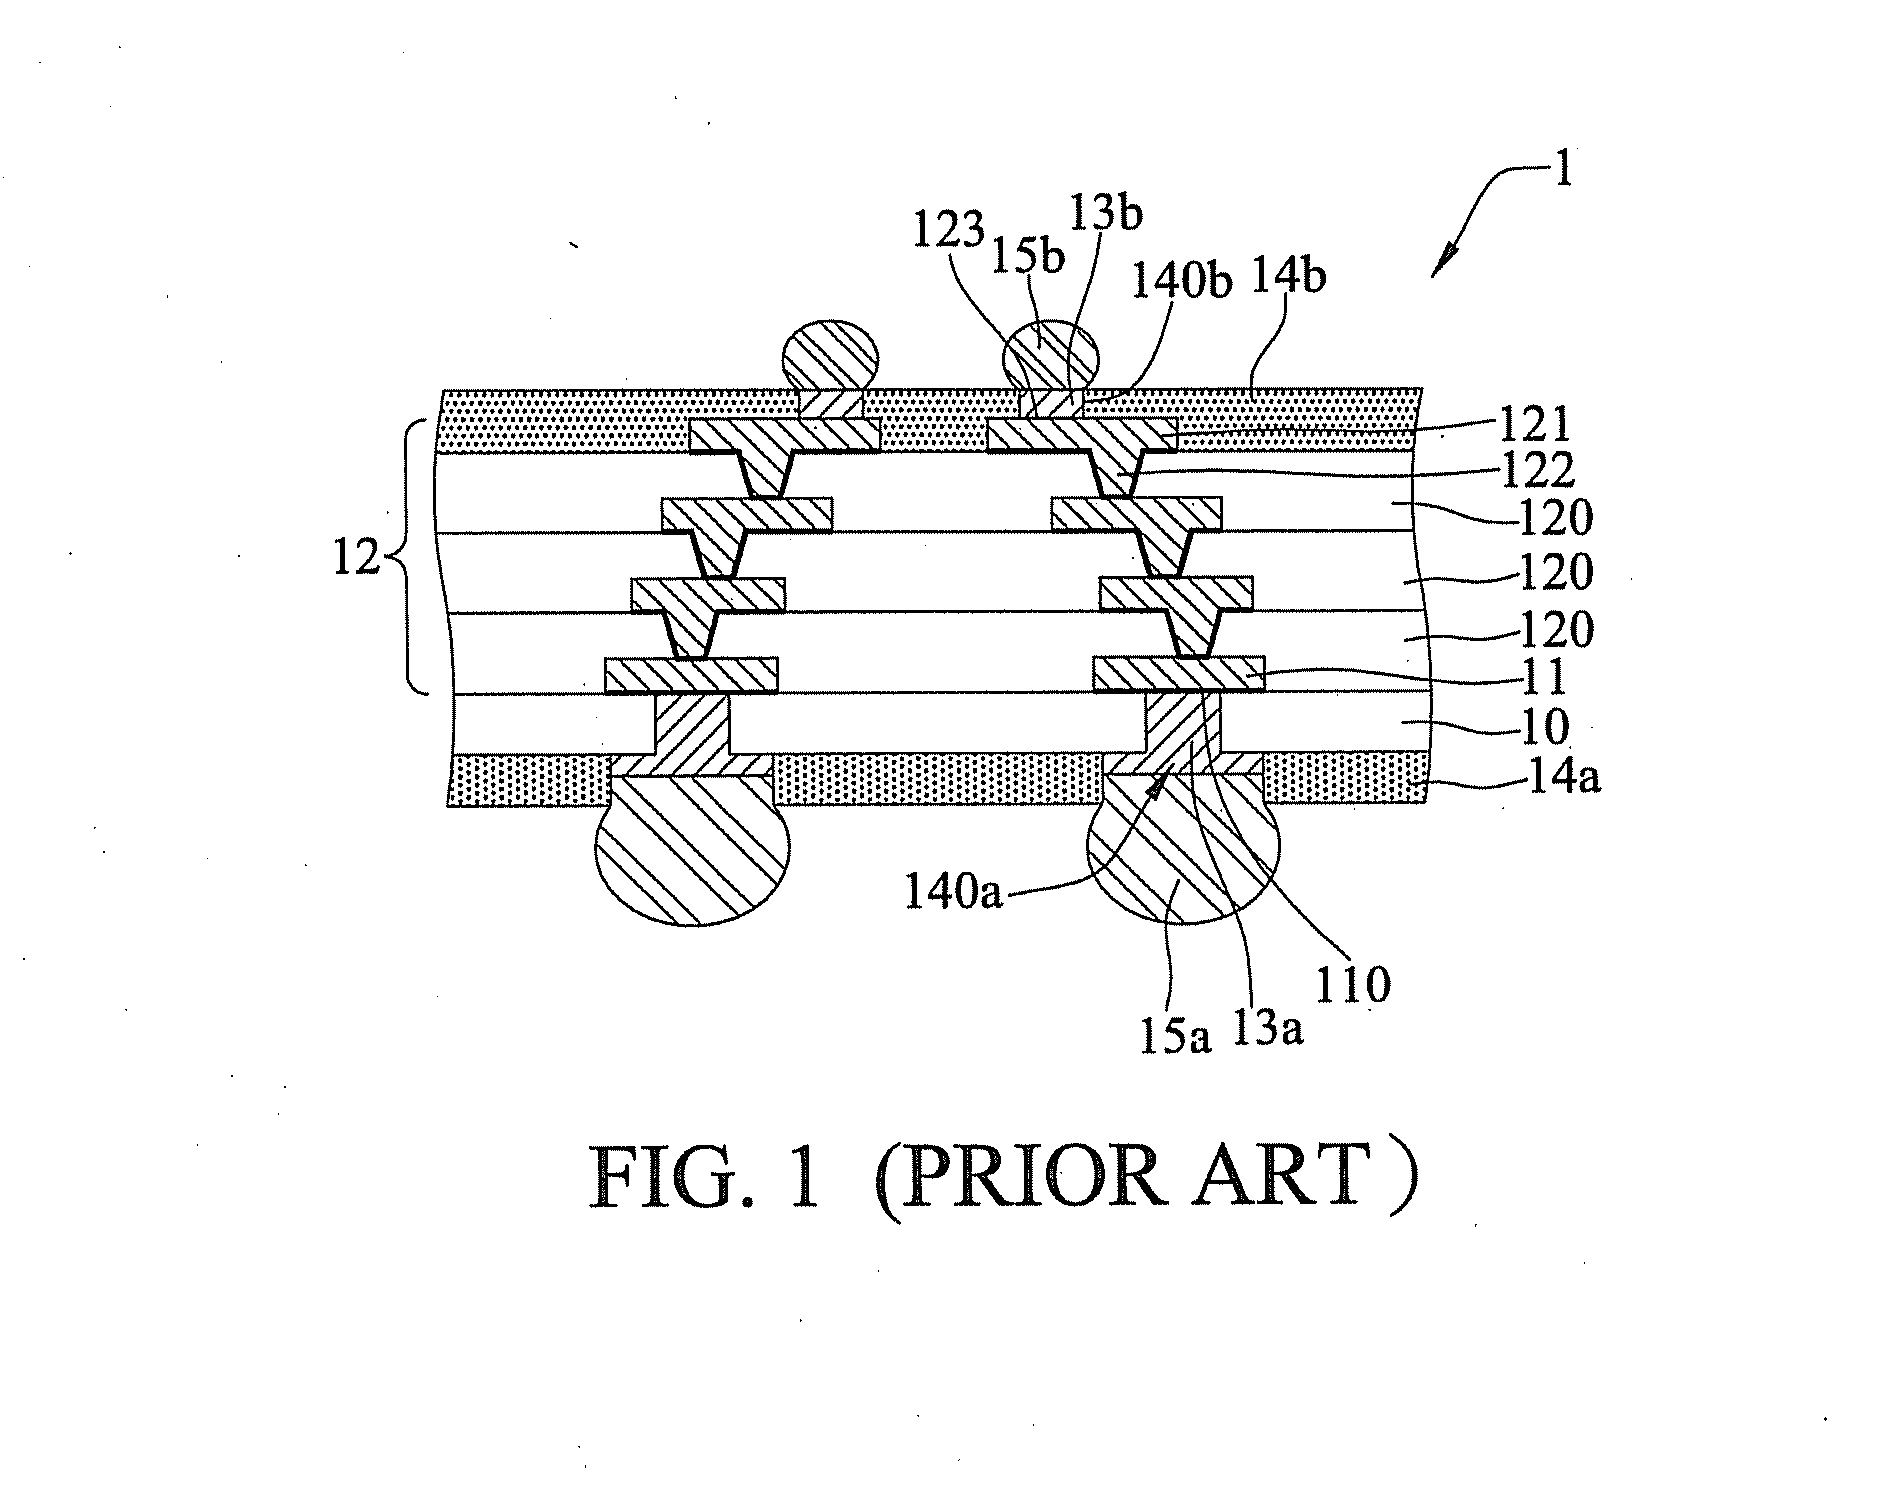 Coreless packaging substrate and method of fabricating the same